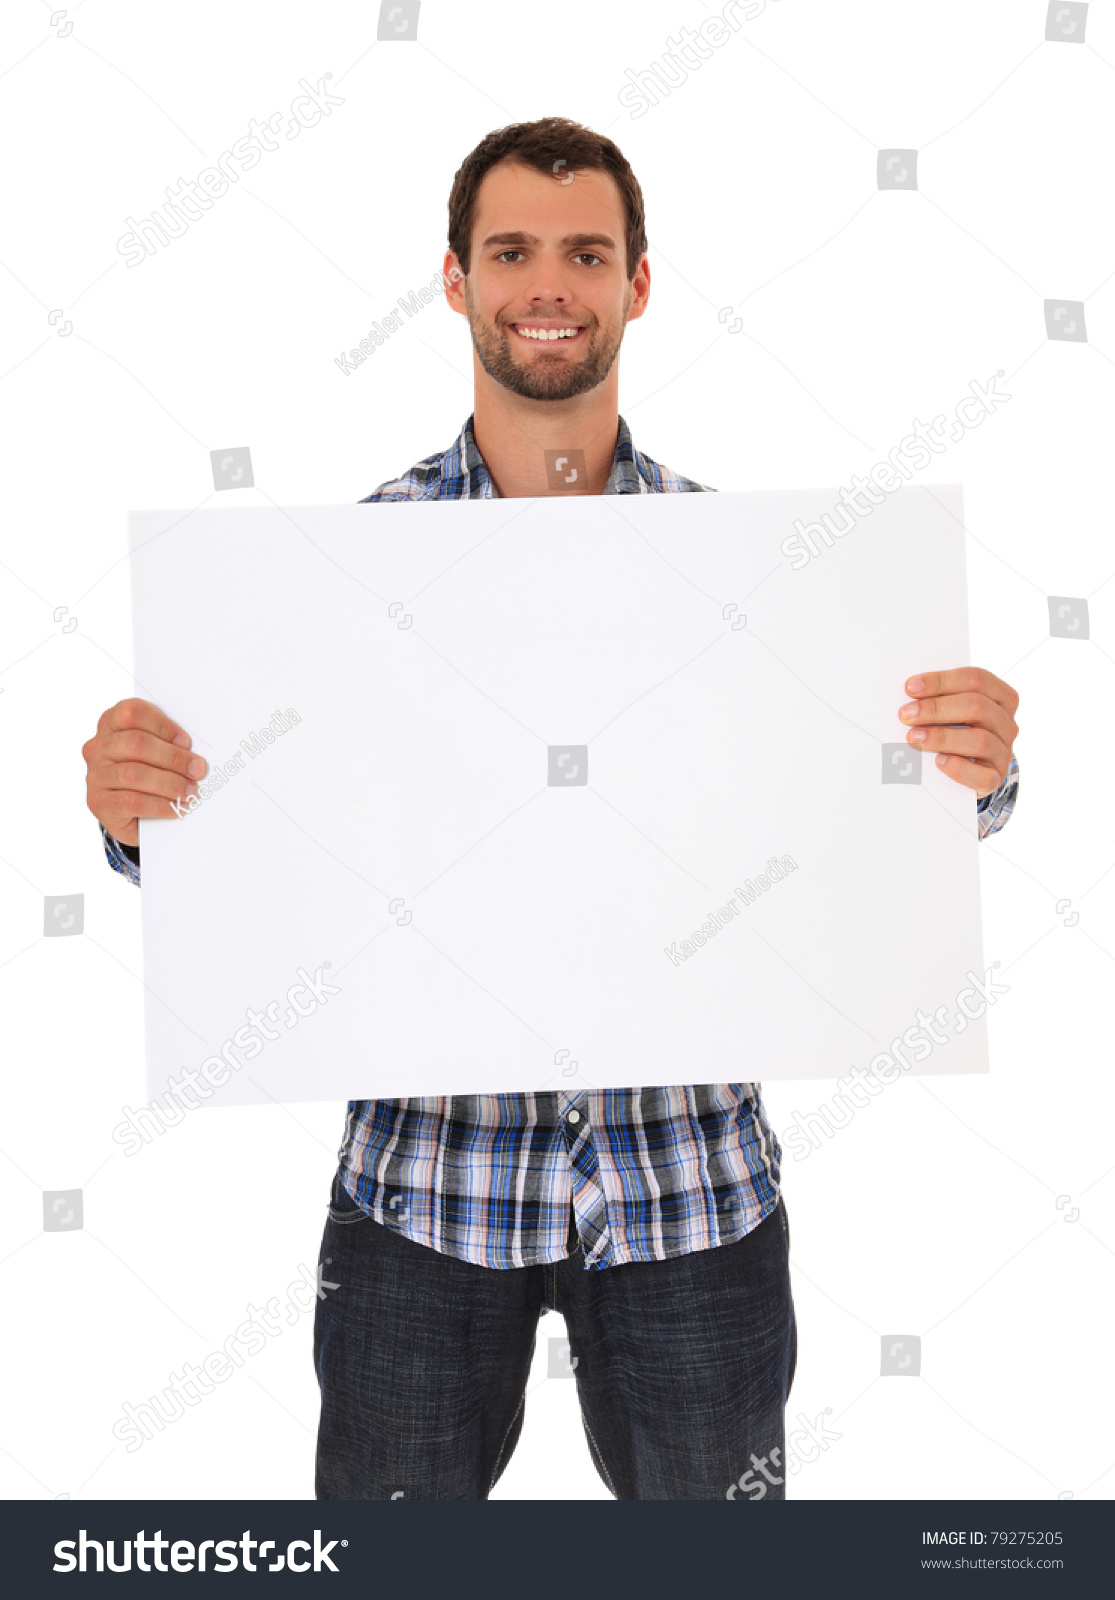 clipart man holding sign - photo #40